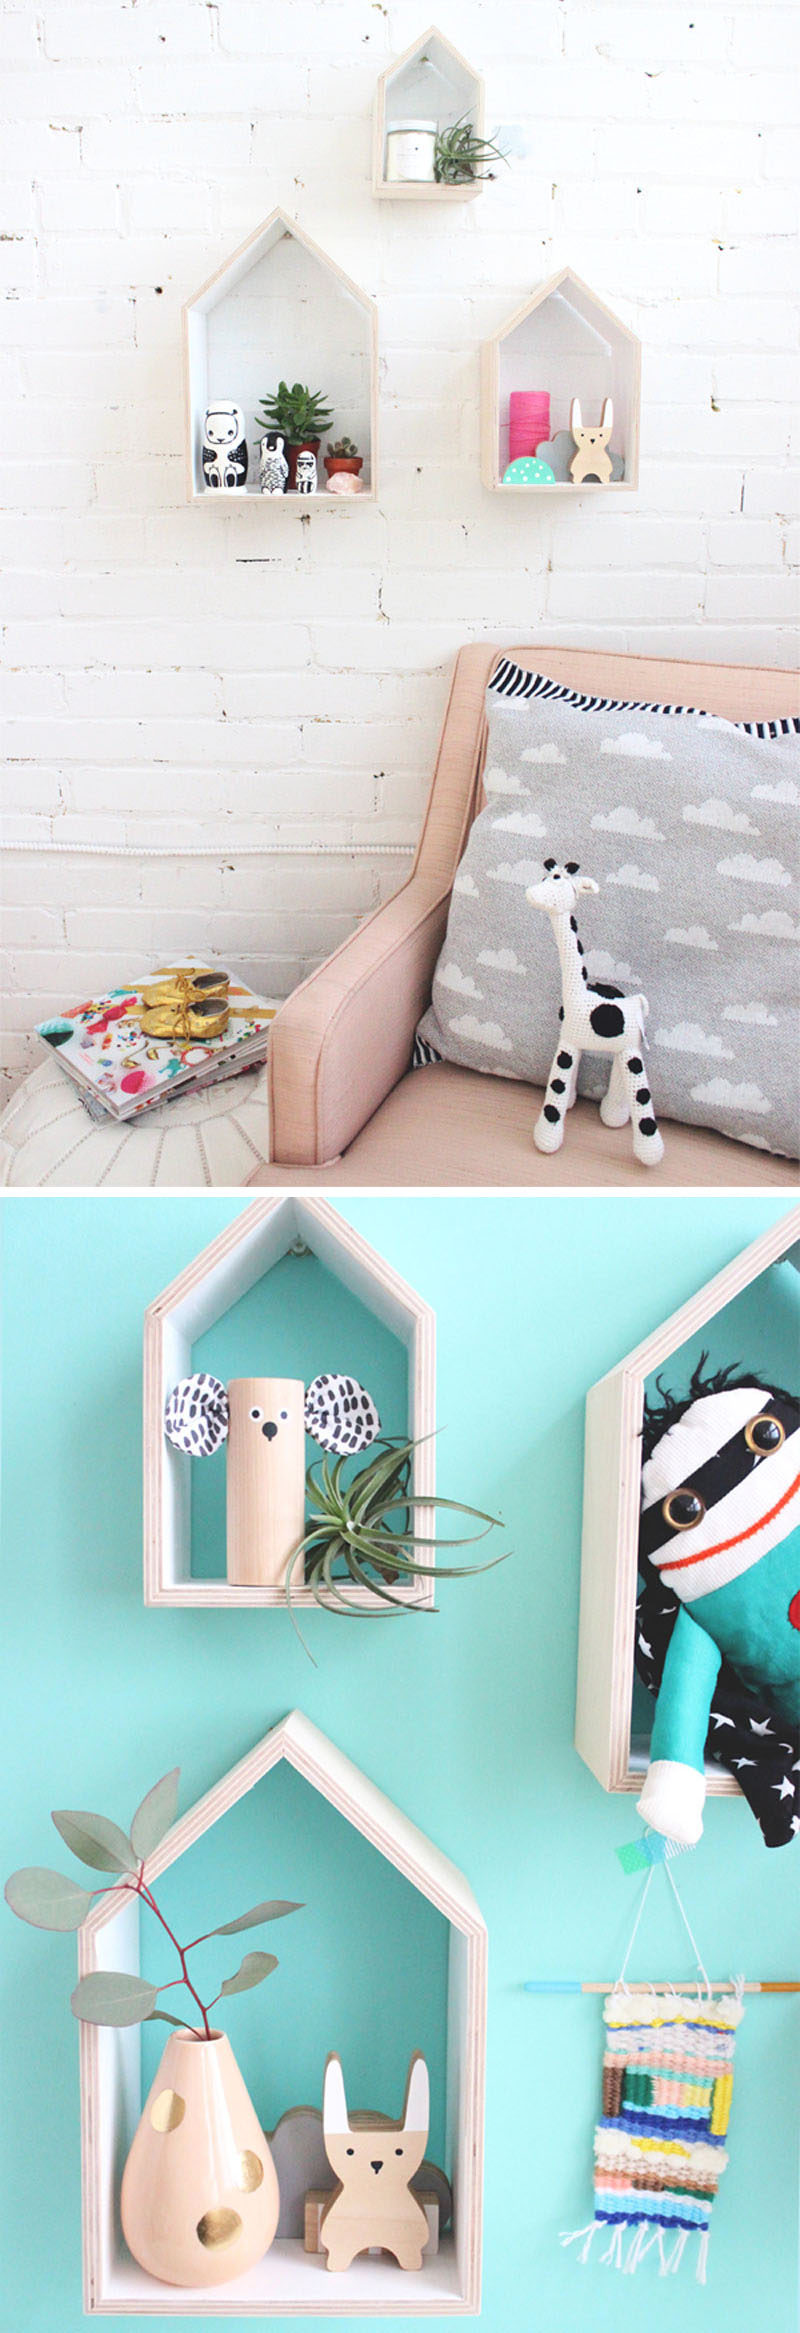 House-shaped wall shelves are a cute bedroom decorating idea for little girls or tweens.